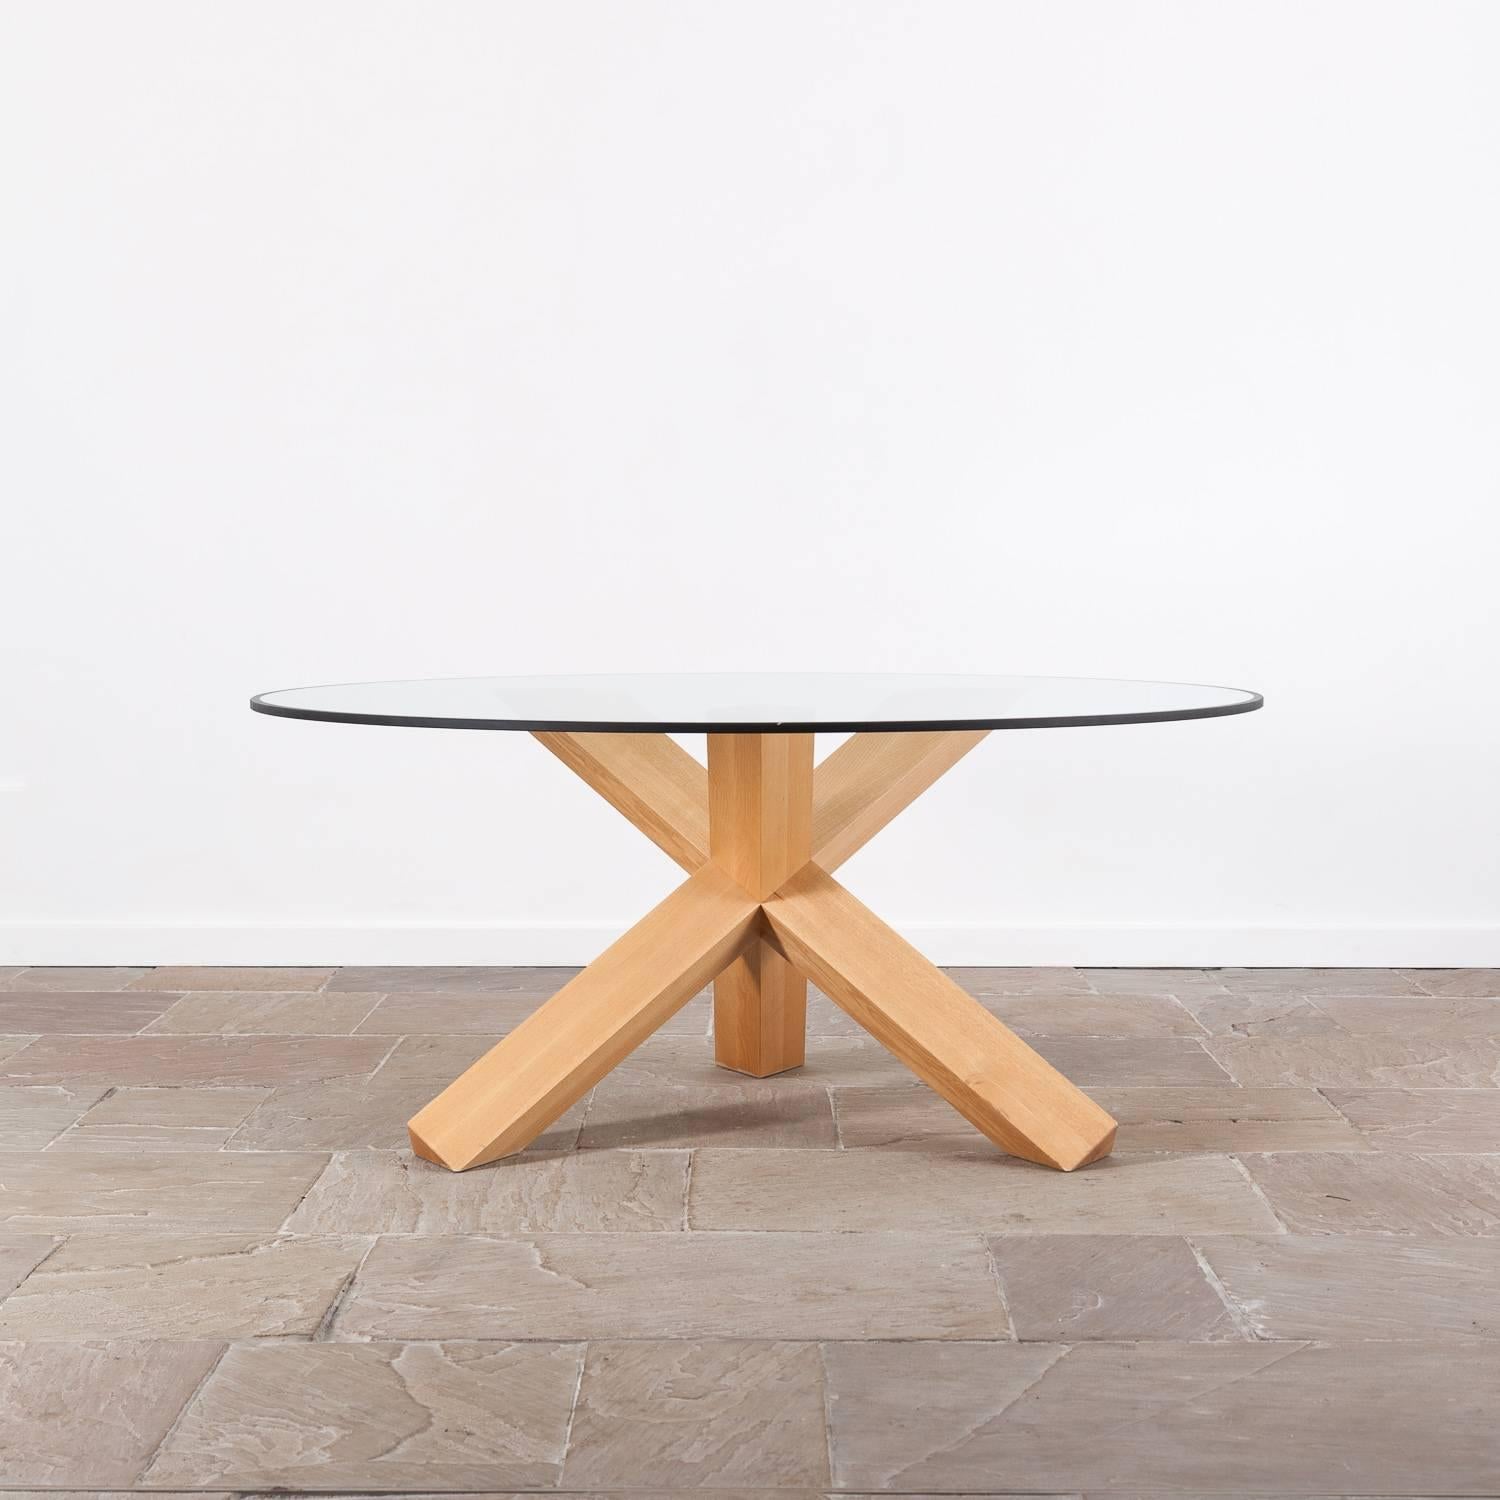 La Rotonda dining table by Mario Bellini for Cassina. Originally designed in 1976.

Glass topped table with a natural ash base. 

There are two chips on the outer edge of the very substantial glass top other than this it is in good condition